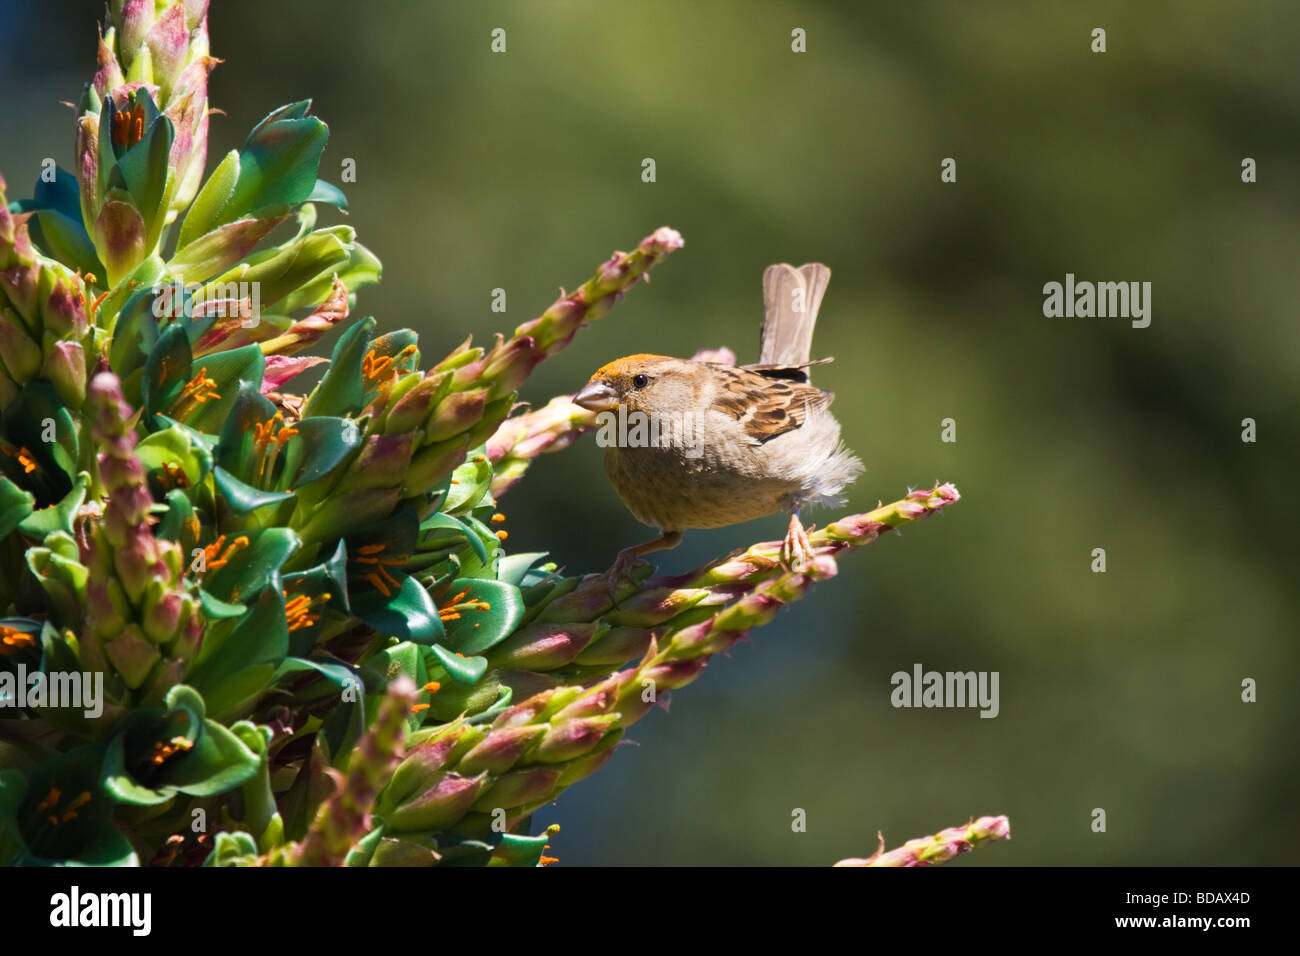 House sparrow with orange head on Puya Chilensis Stock Photo